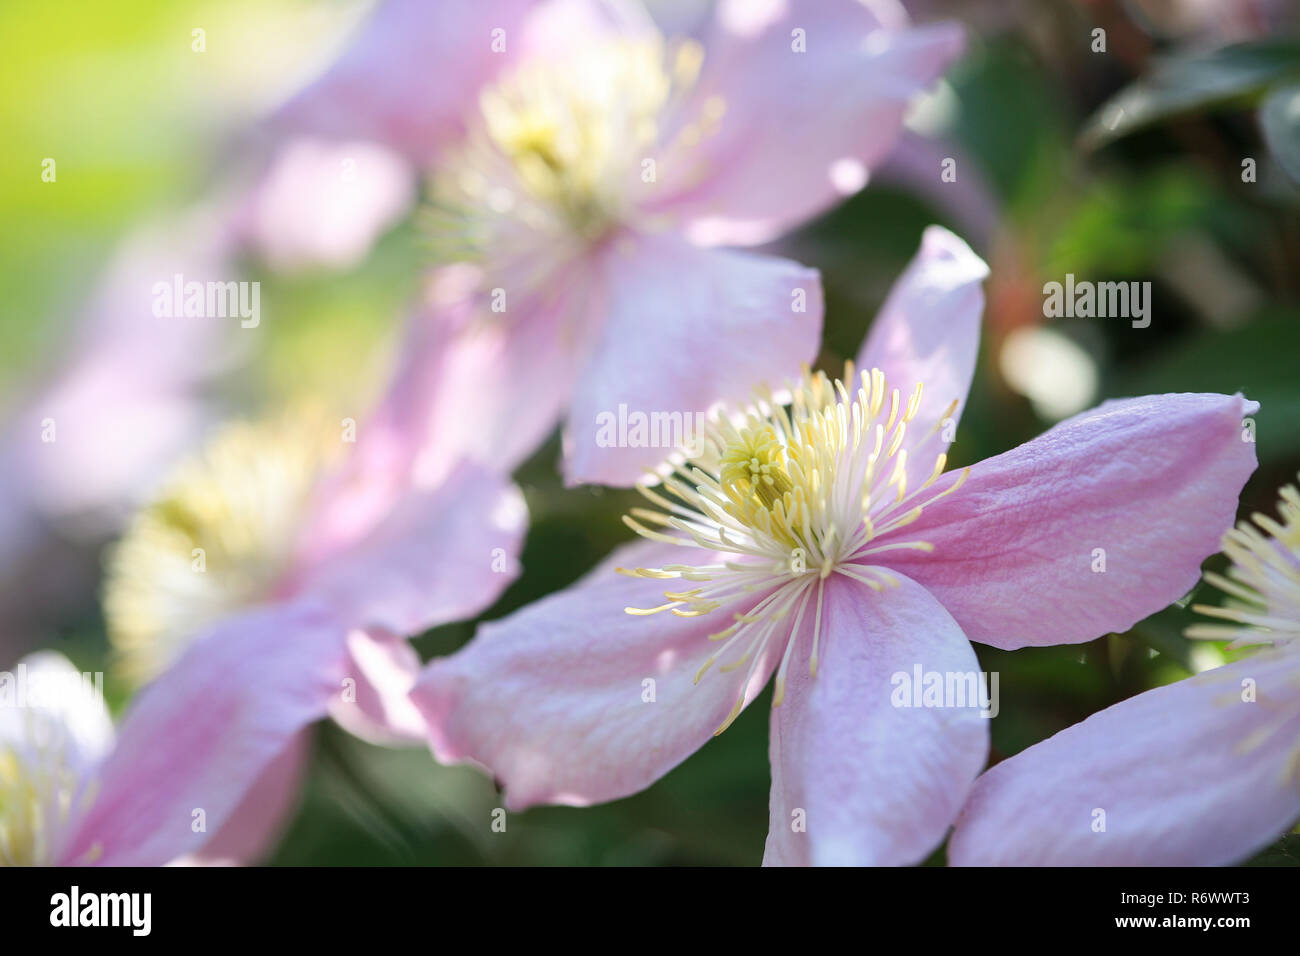 Clematis montana blossoms in the garden Stock Photo